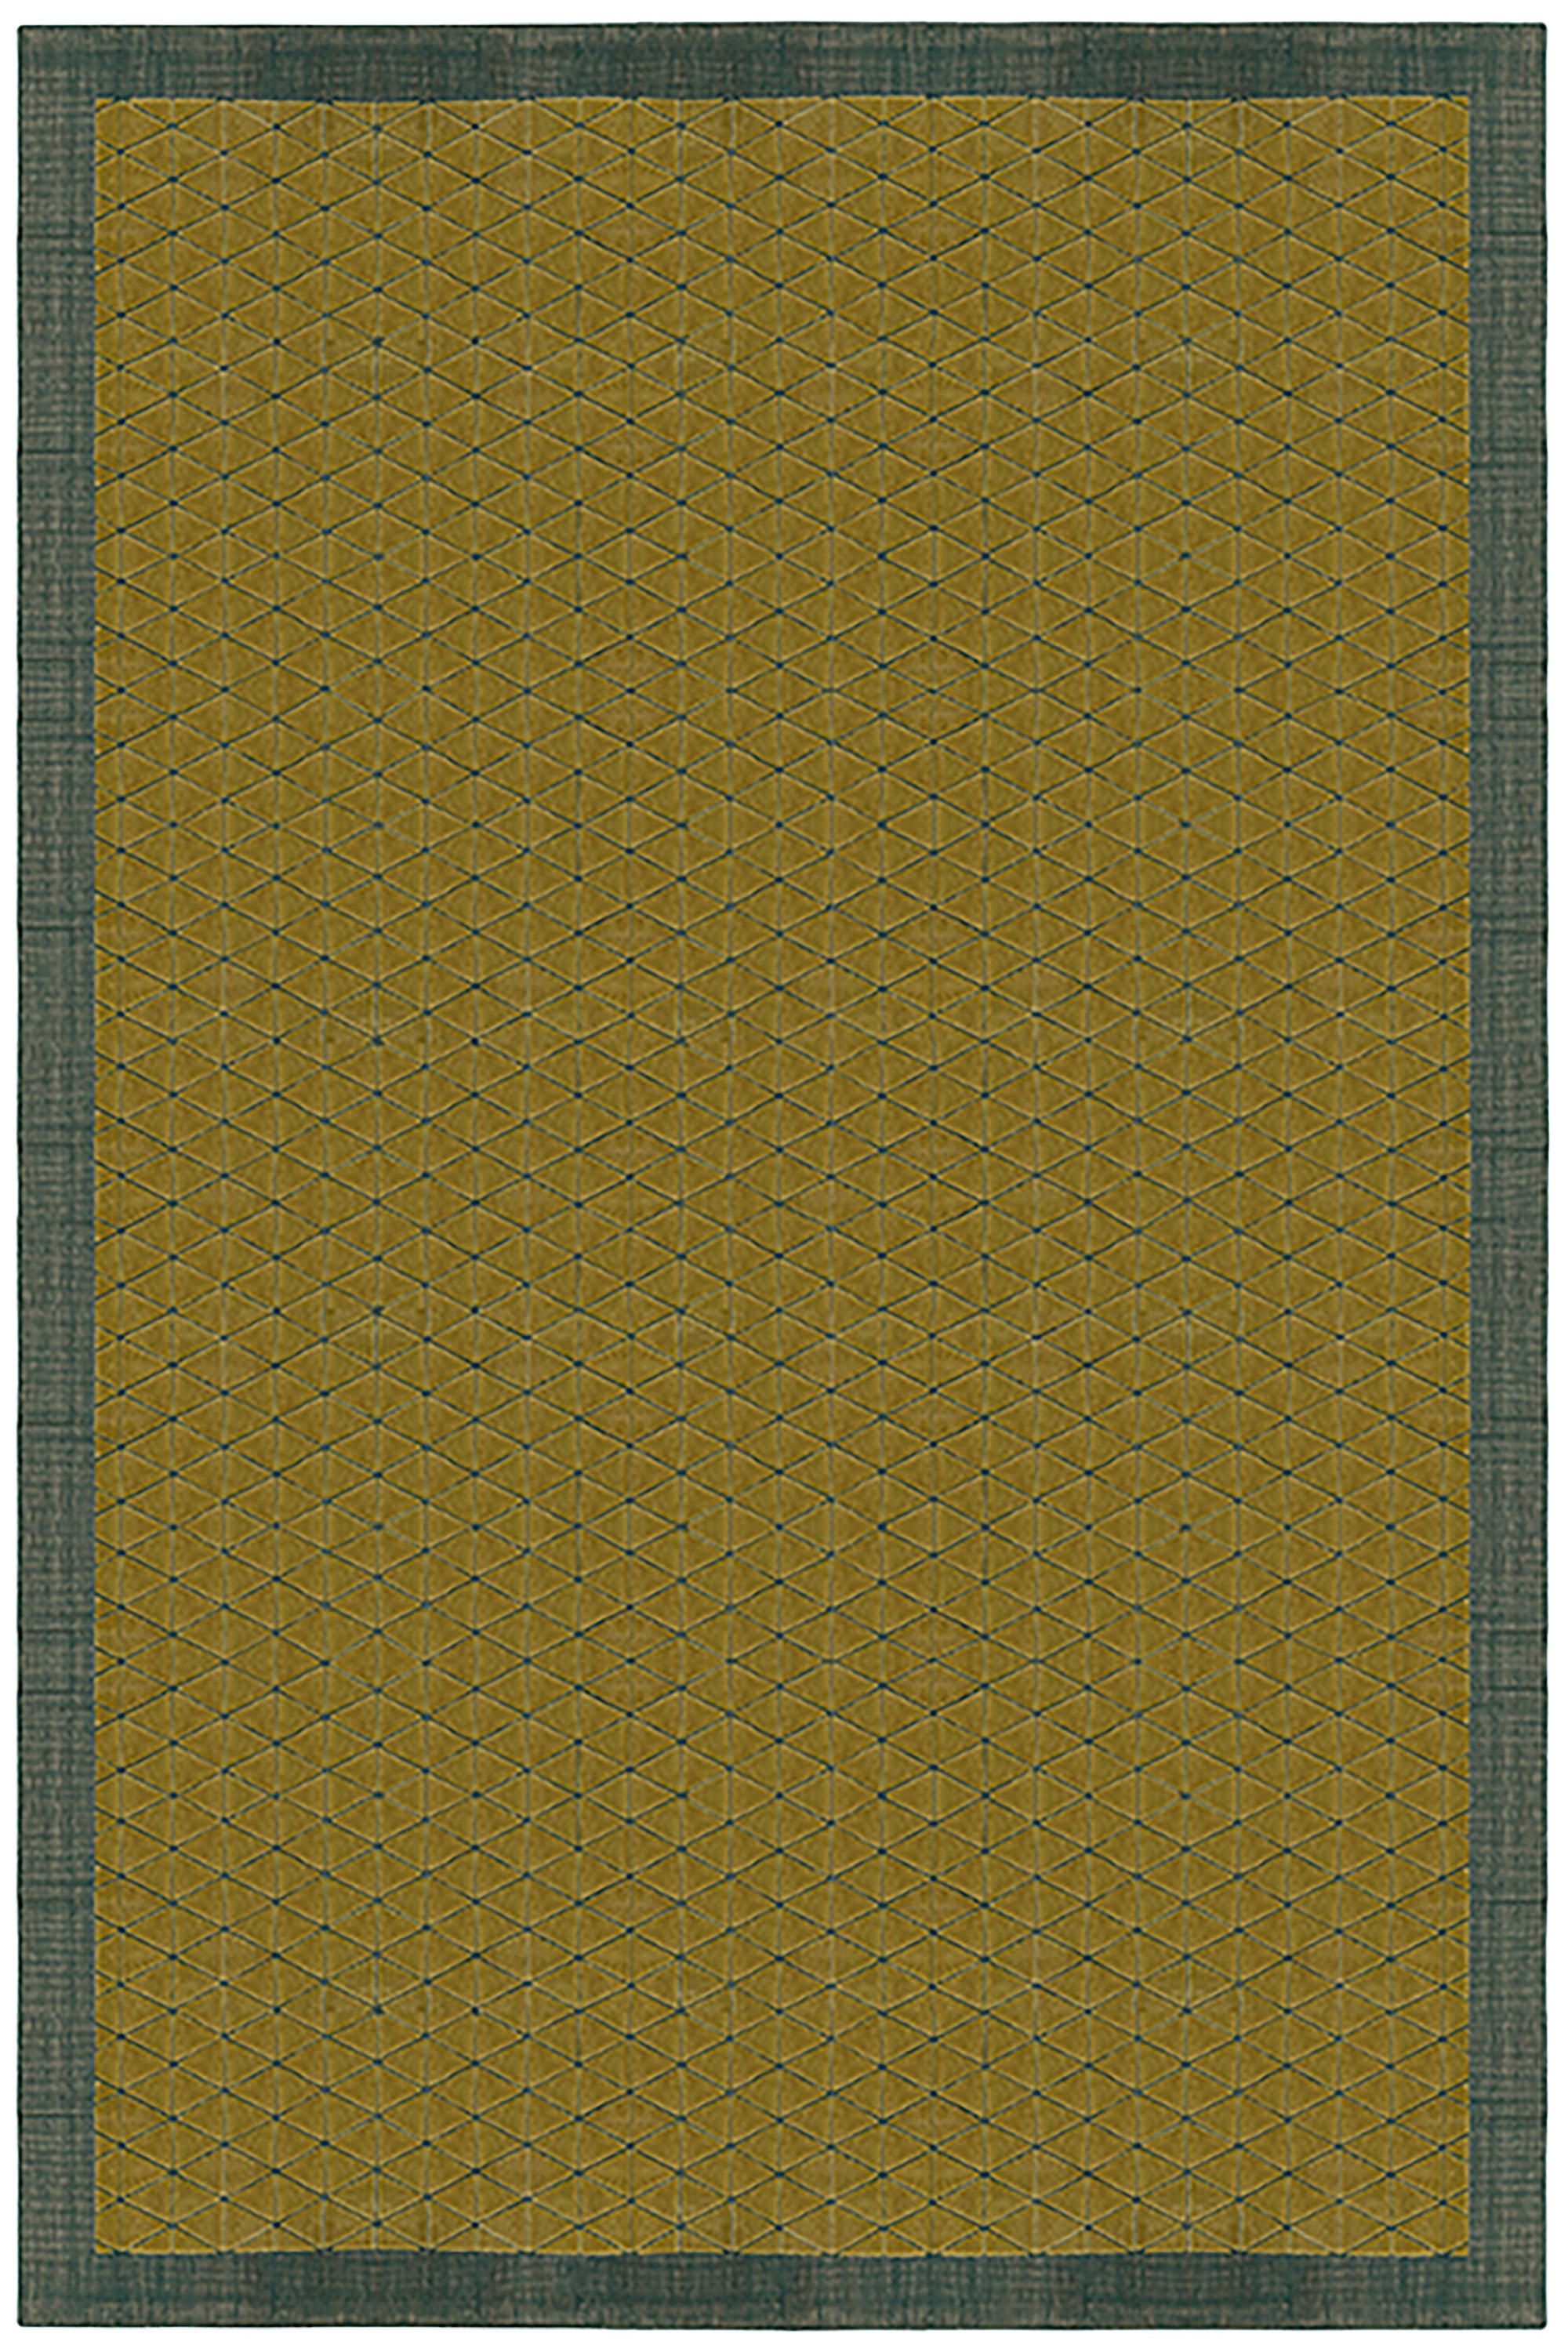 Full size Bucky Rug in citrine-jade, features a wide dark sage green border with a chartreuse colored lattice field  with a metallic sheen. 